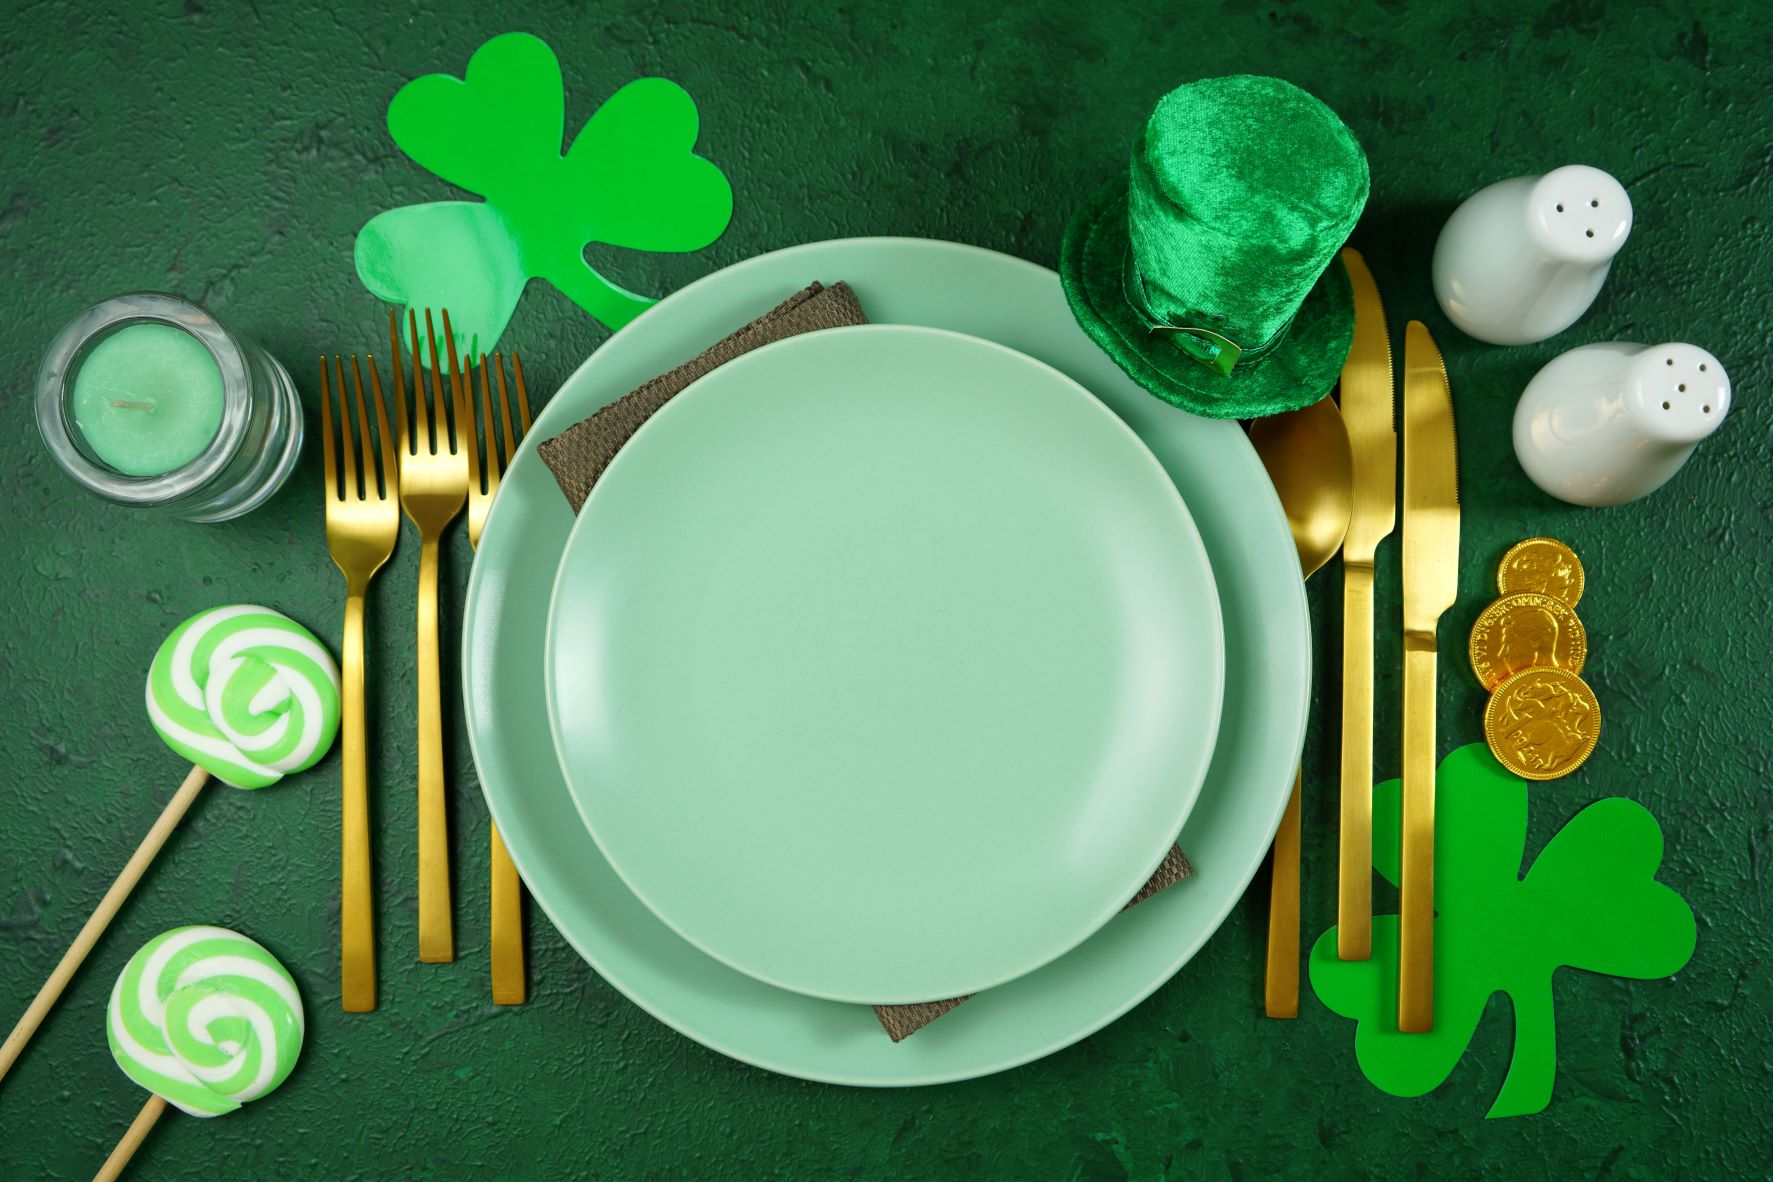 Green Themed Low Carb Recipes for a Fun St. Patrick’s Day